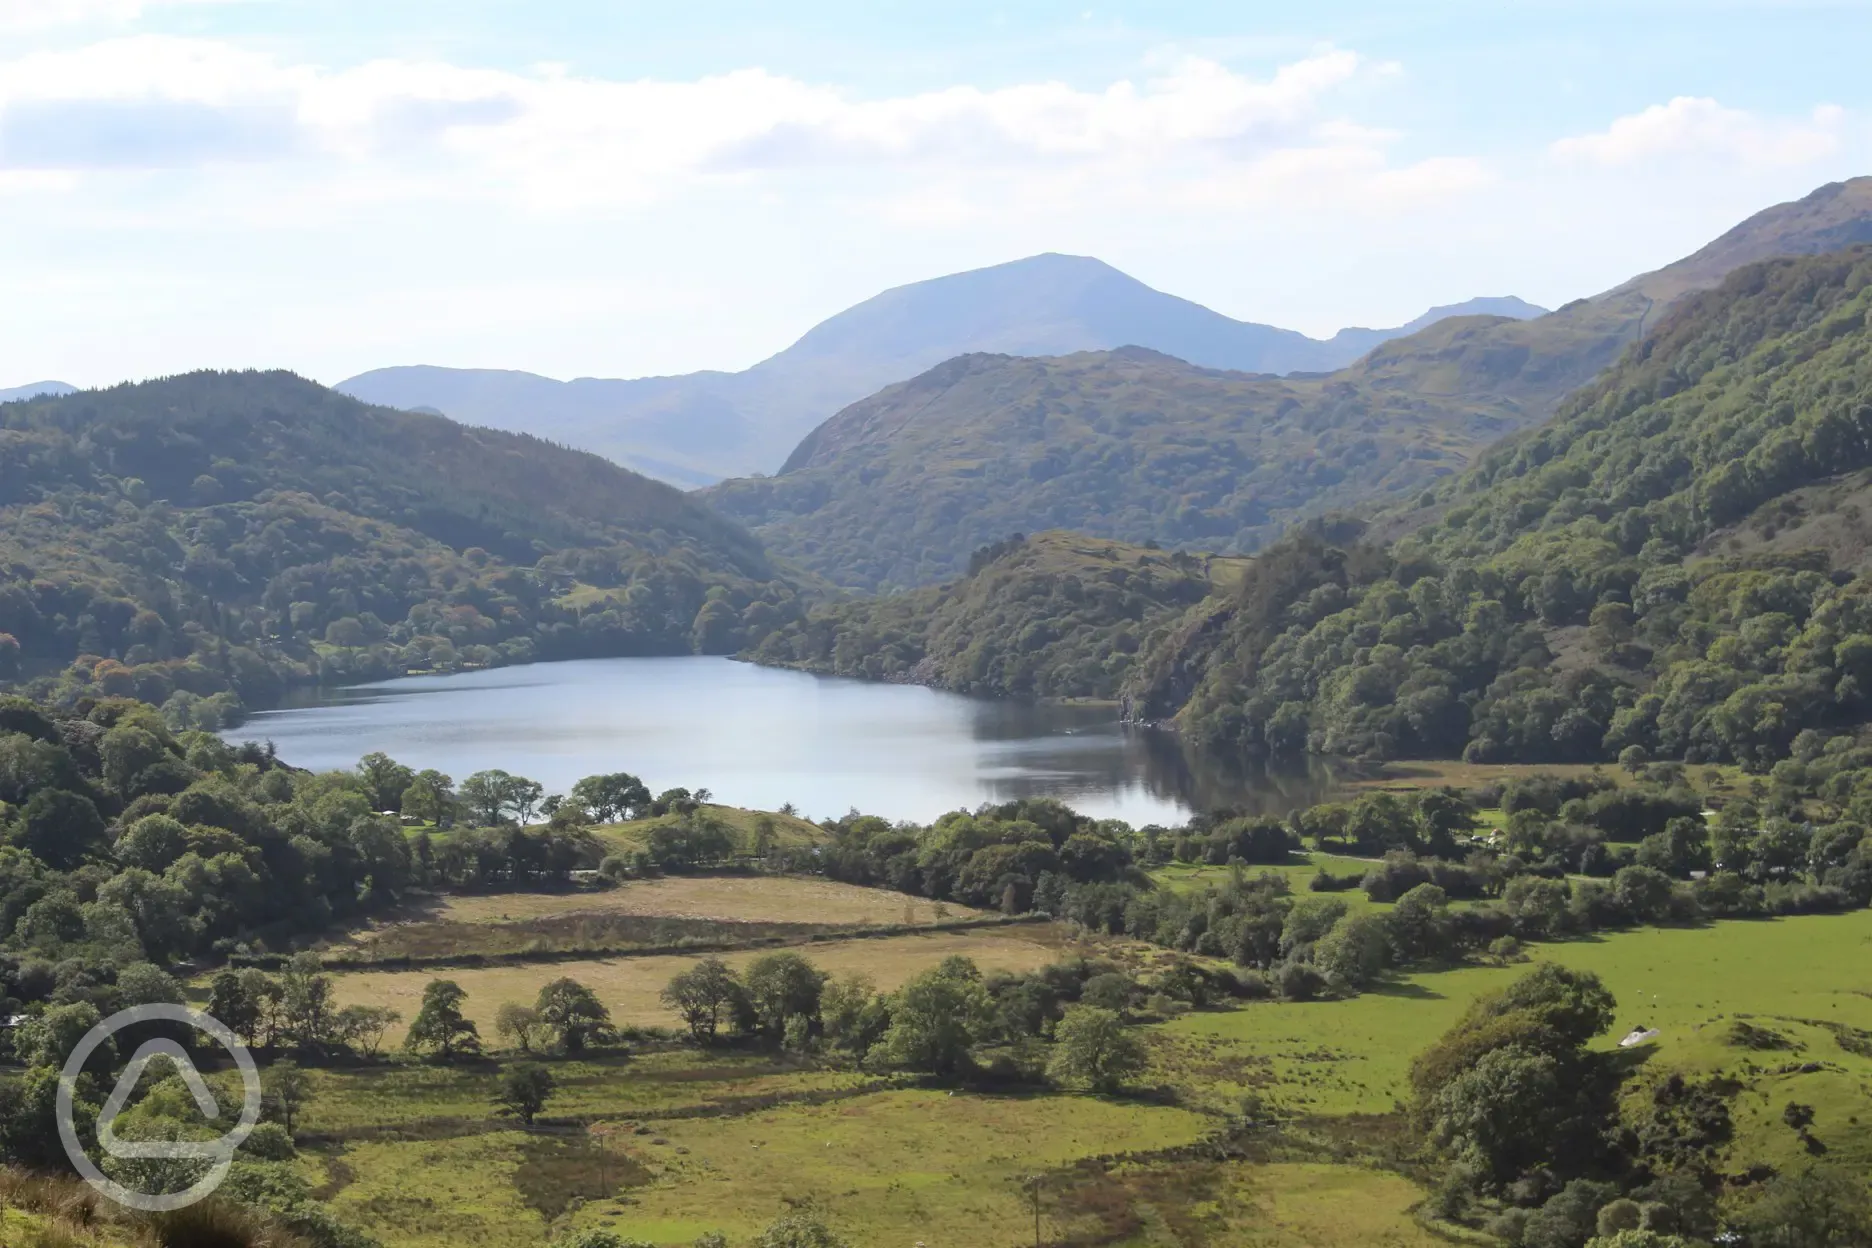 The campsite is situated at the head of Llyn Gwynant.